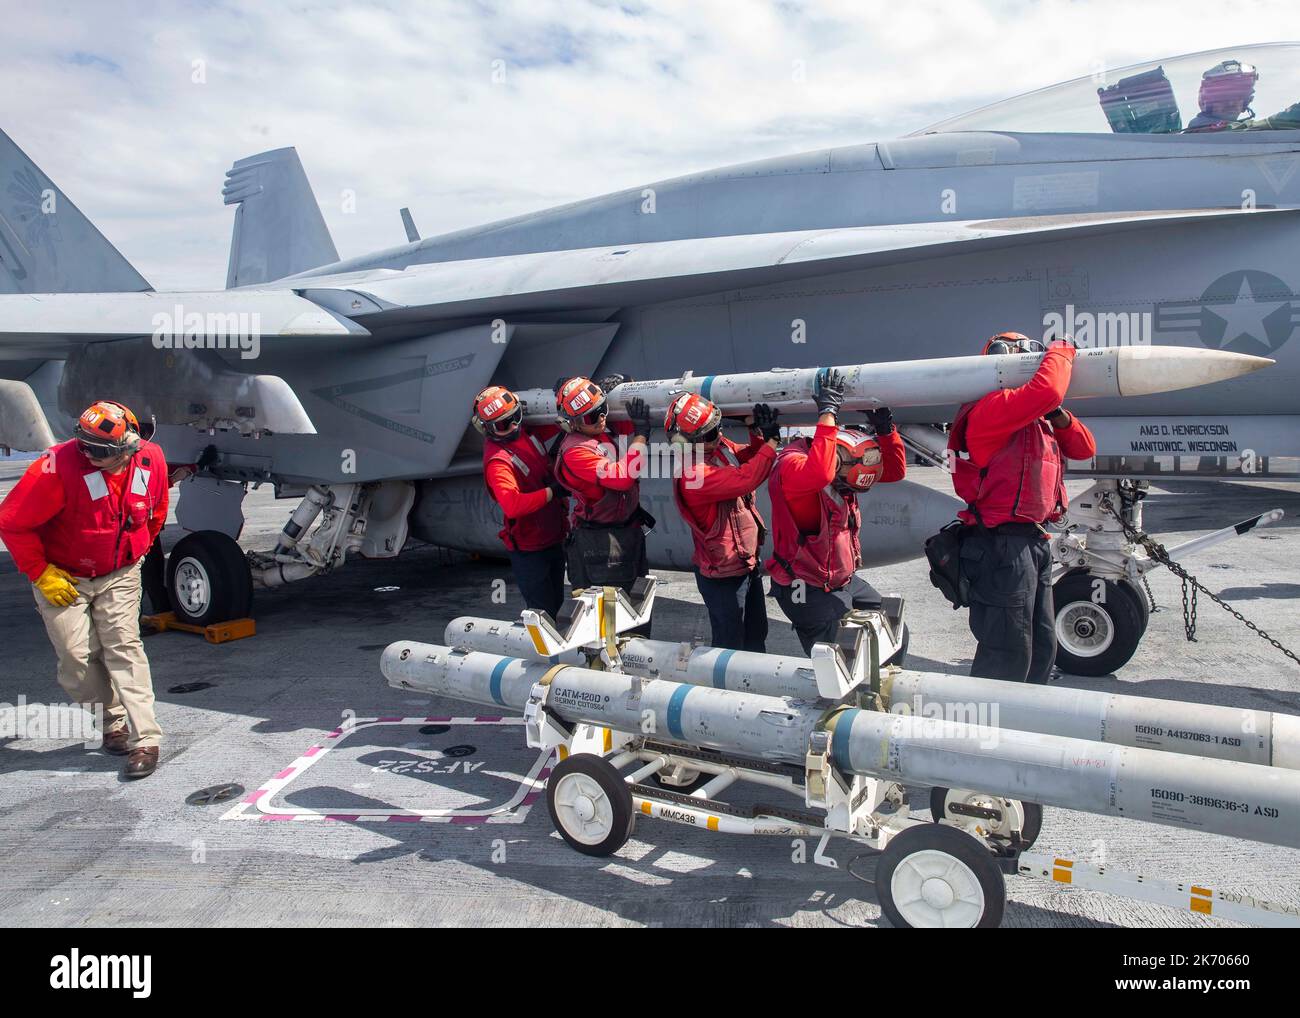 Sailors assigned to the 'Golden Warriors' of Strike Fighter Squadron (VFA) 87 transport a missile from the wing of an F/A-18E Super Hornet to an ordnance transportation cart on the first-in-class aircraft carrier USS Gerald R. Ford’s (CVN 78) flight deck during cyclic flight operations, Oct. 10, 2022. The Gerald R. Ford Carrier Strike Group (GRFCG) is deployed in the Atlantic Ocean, conducting training and operations alongside NATO Allies and partners to enhance integration for future operations and demonstrate the U.S. Navy’s commitment to a peaceful, stable and conflict-free Atlantic region Stock Photo